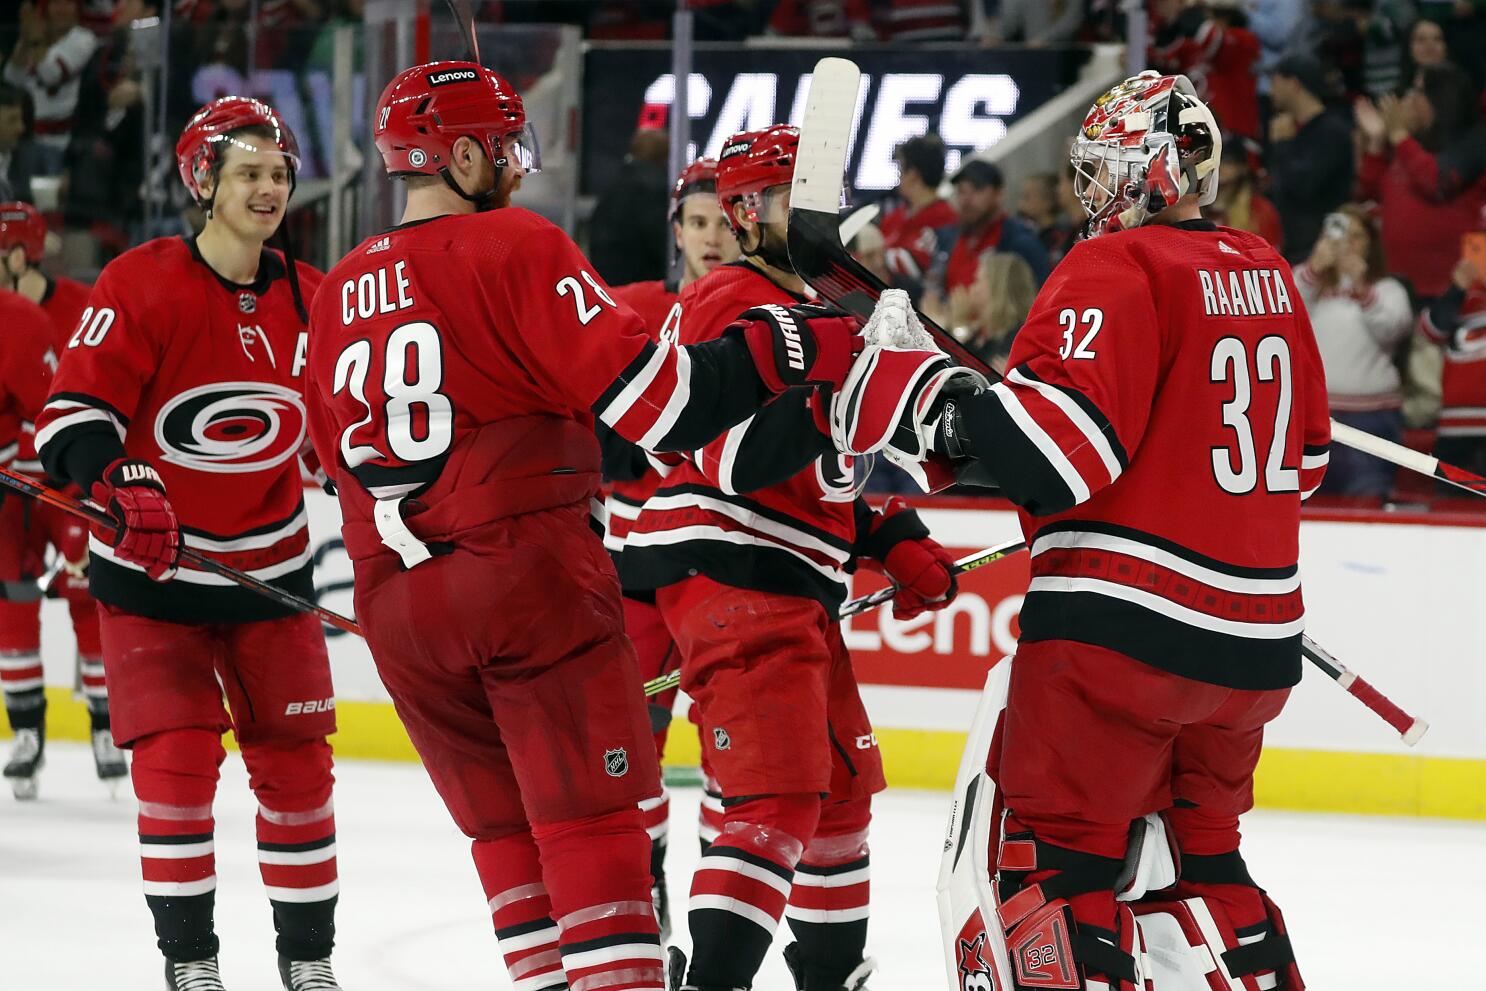 Carolina Hurricanes: Looking to build on successful Whalers night